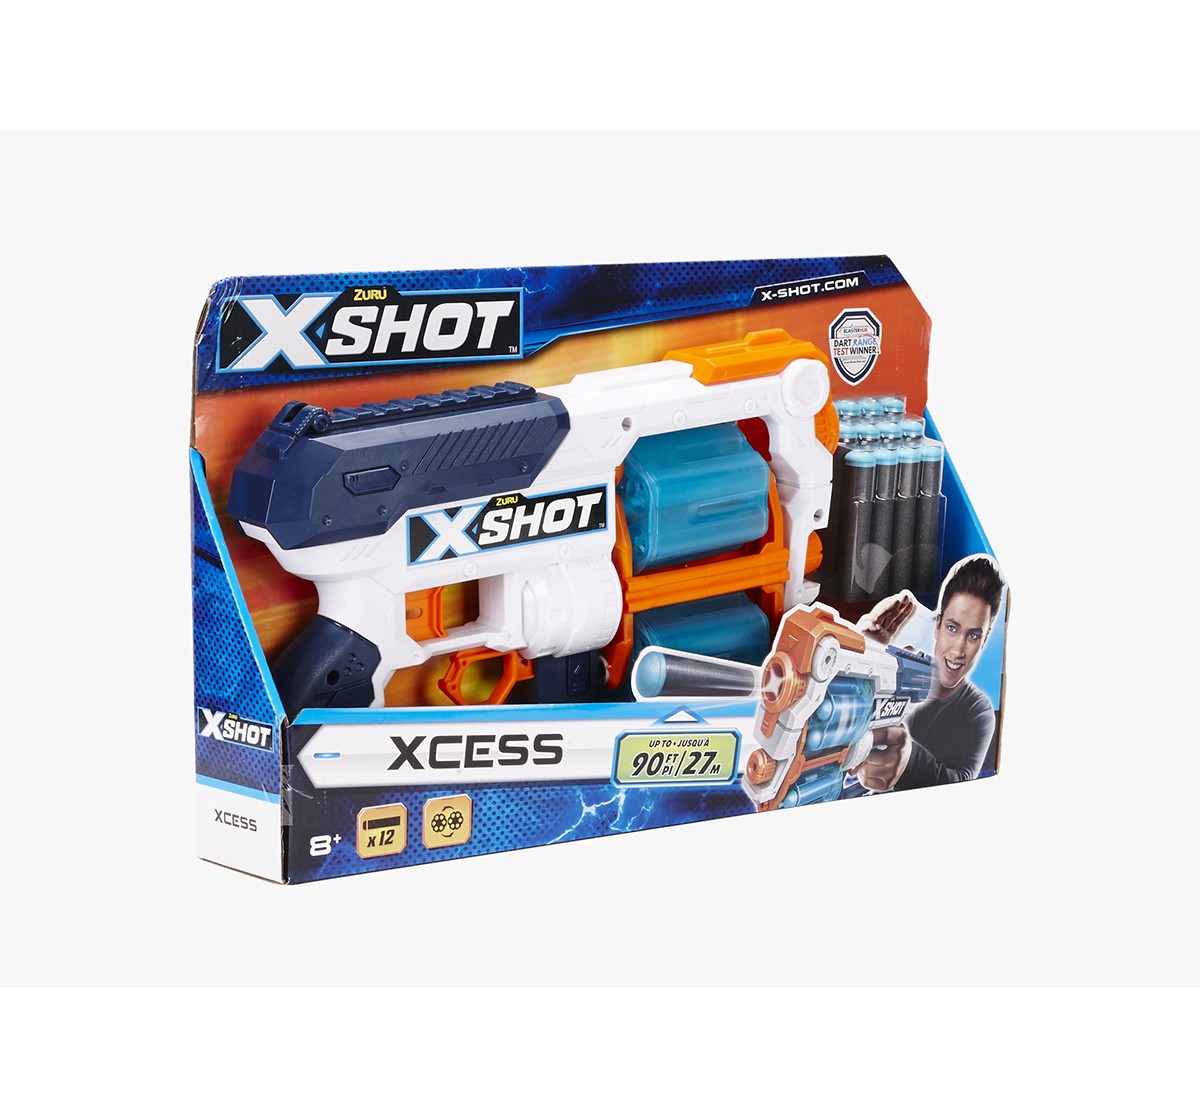 X-Shot Excel Plastic Xcess Tk 12 Blasters for Kids age 8Y+ 